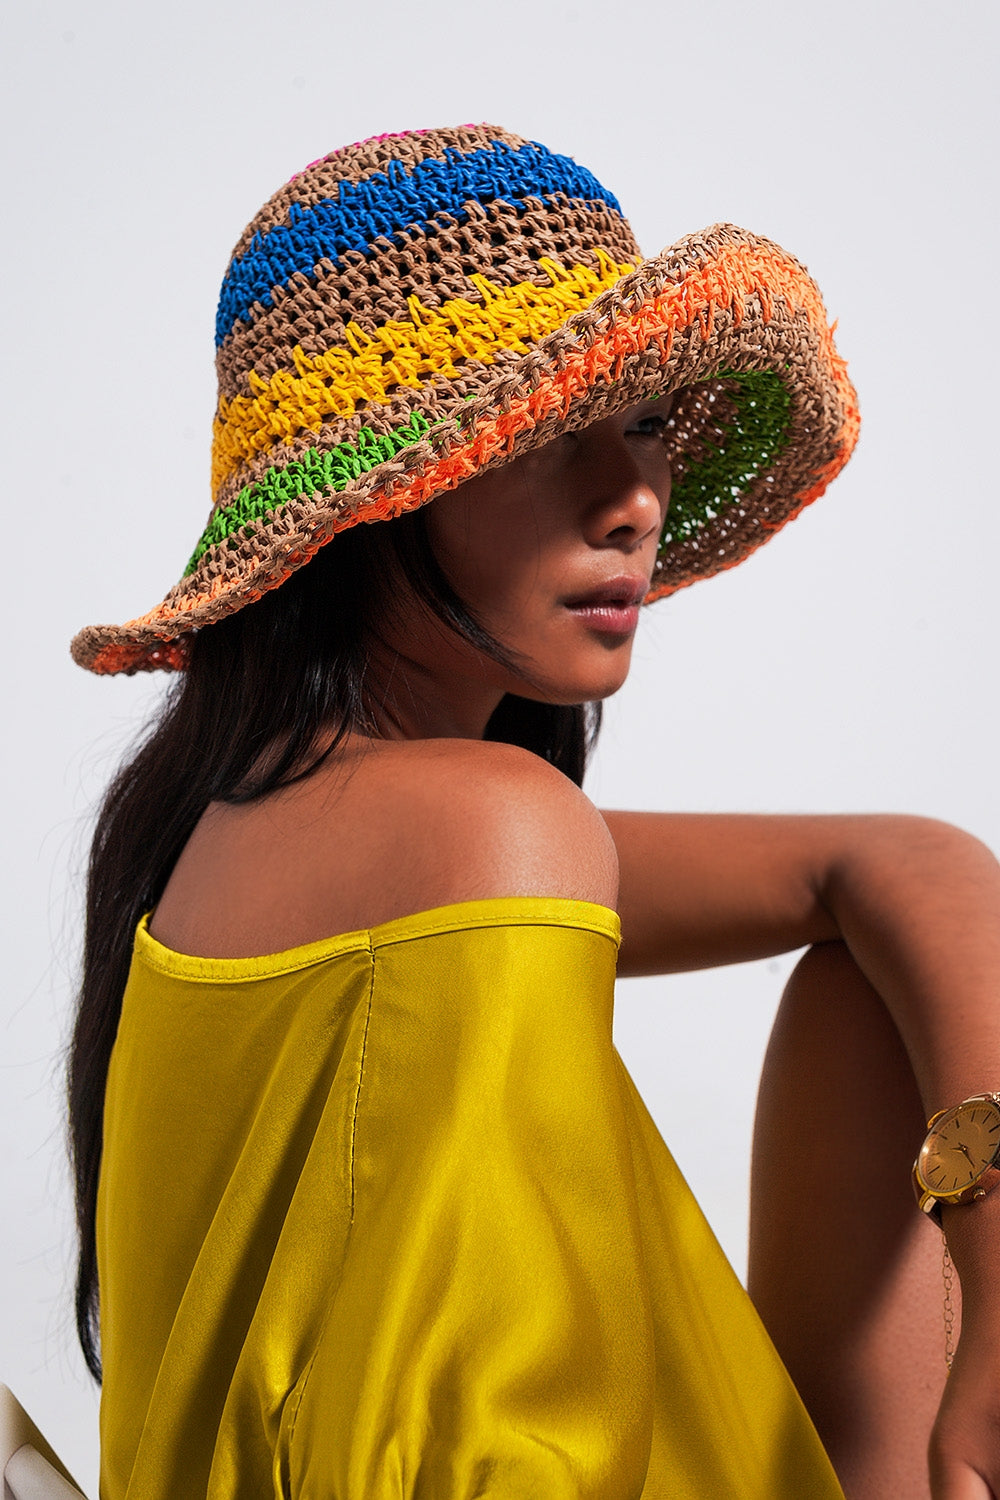 Q2 Sun hat in natural colored stripes